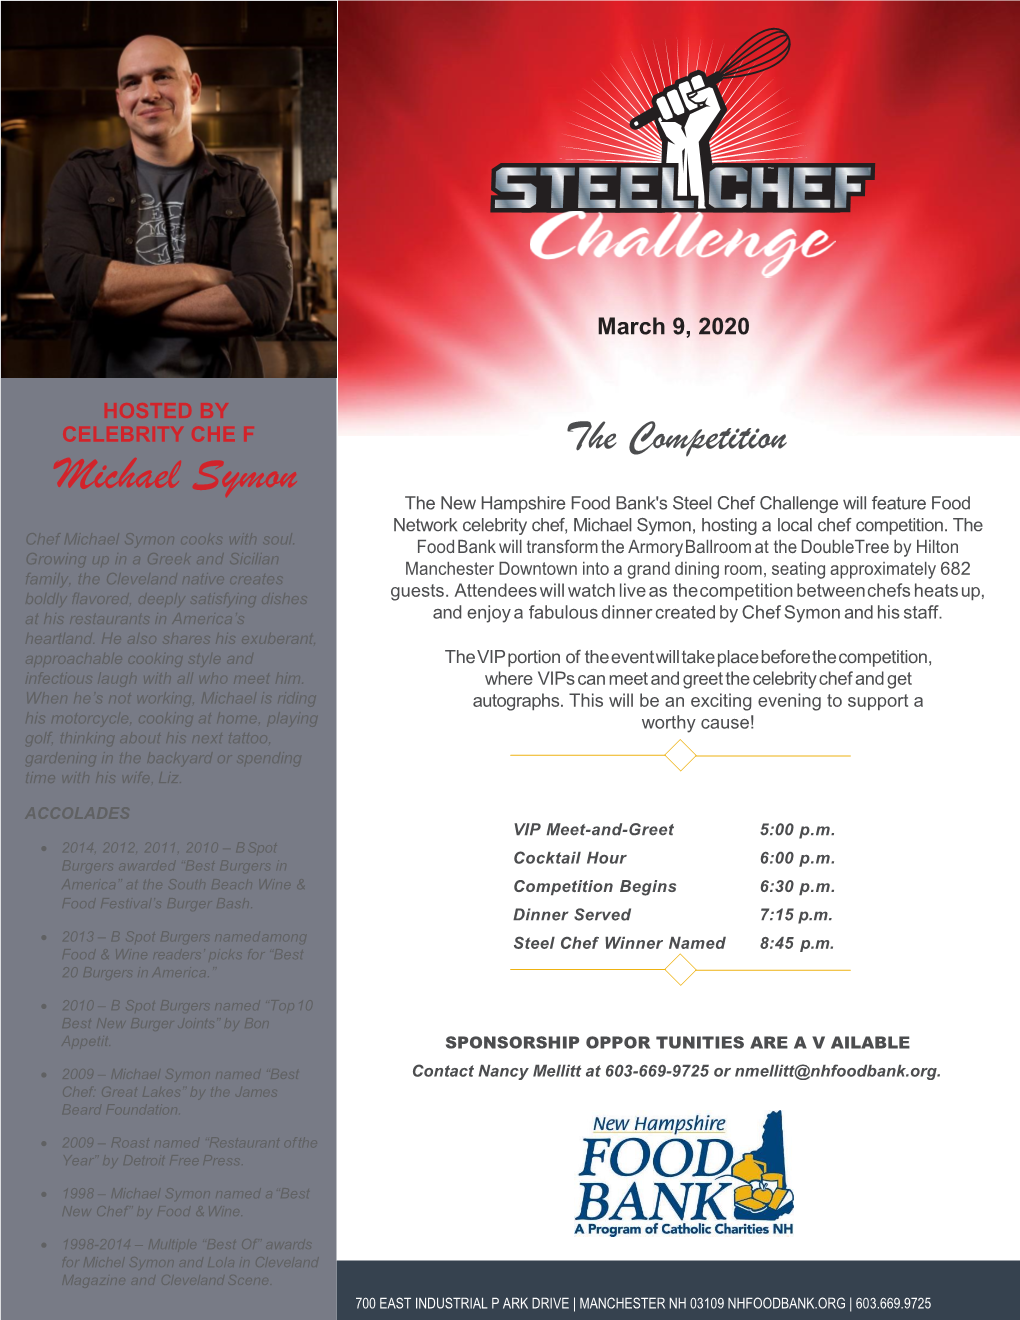 Michael Symon the New Hampshire Food Bank's Steel Chef Challenge Will Feature Food Network Celebrity Chef, Michael Symon, Hosting a Local Chef Competition